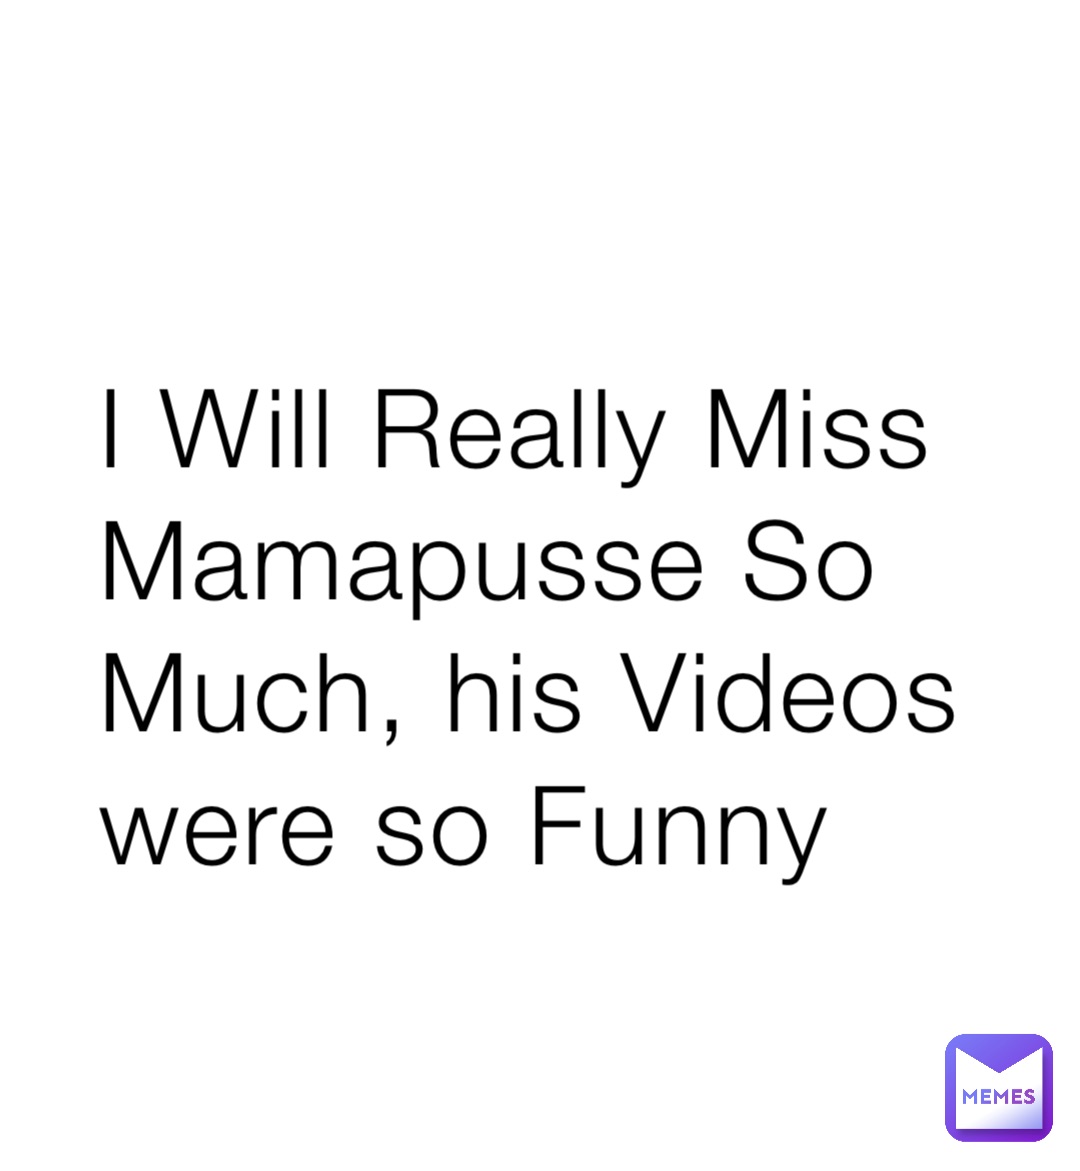 I Will Really Miss Mamapusse So Much, his Videos were so Funny